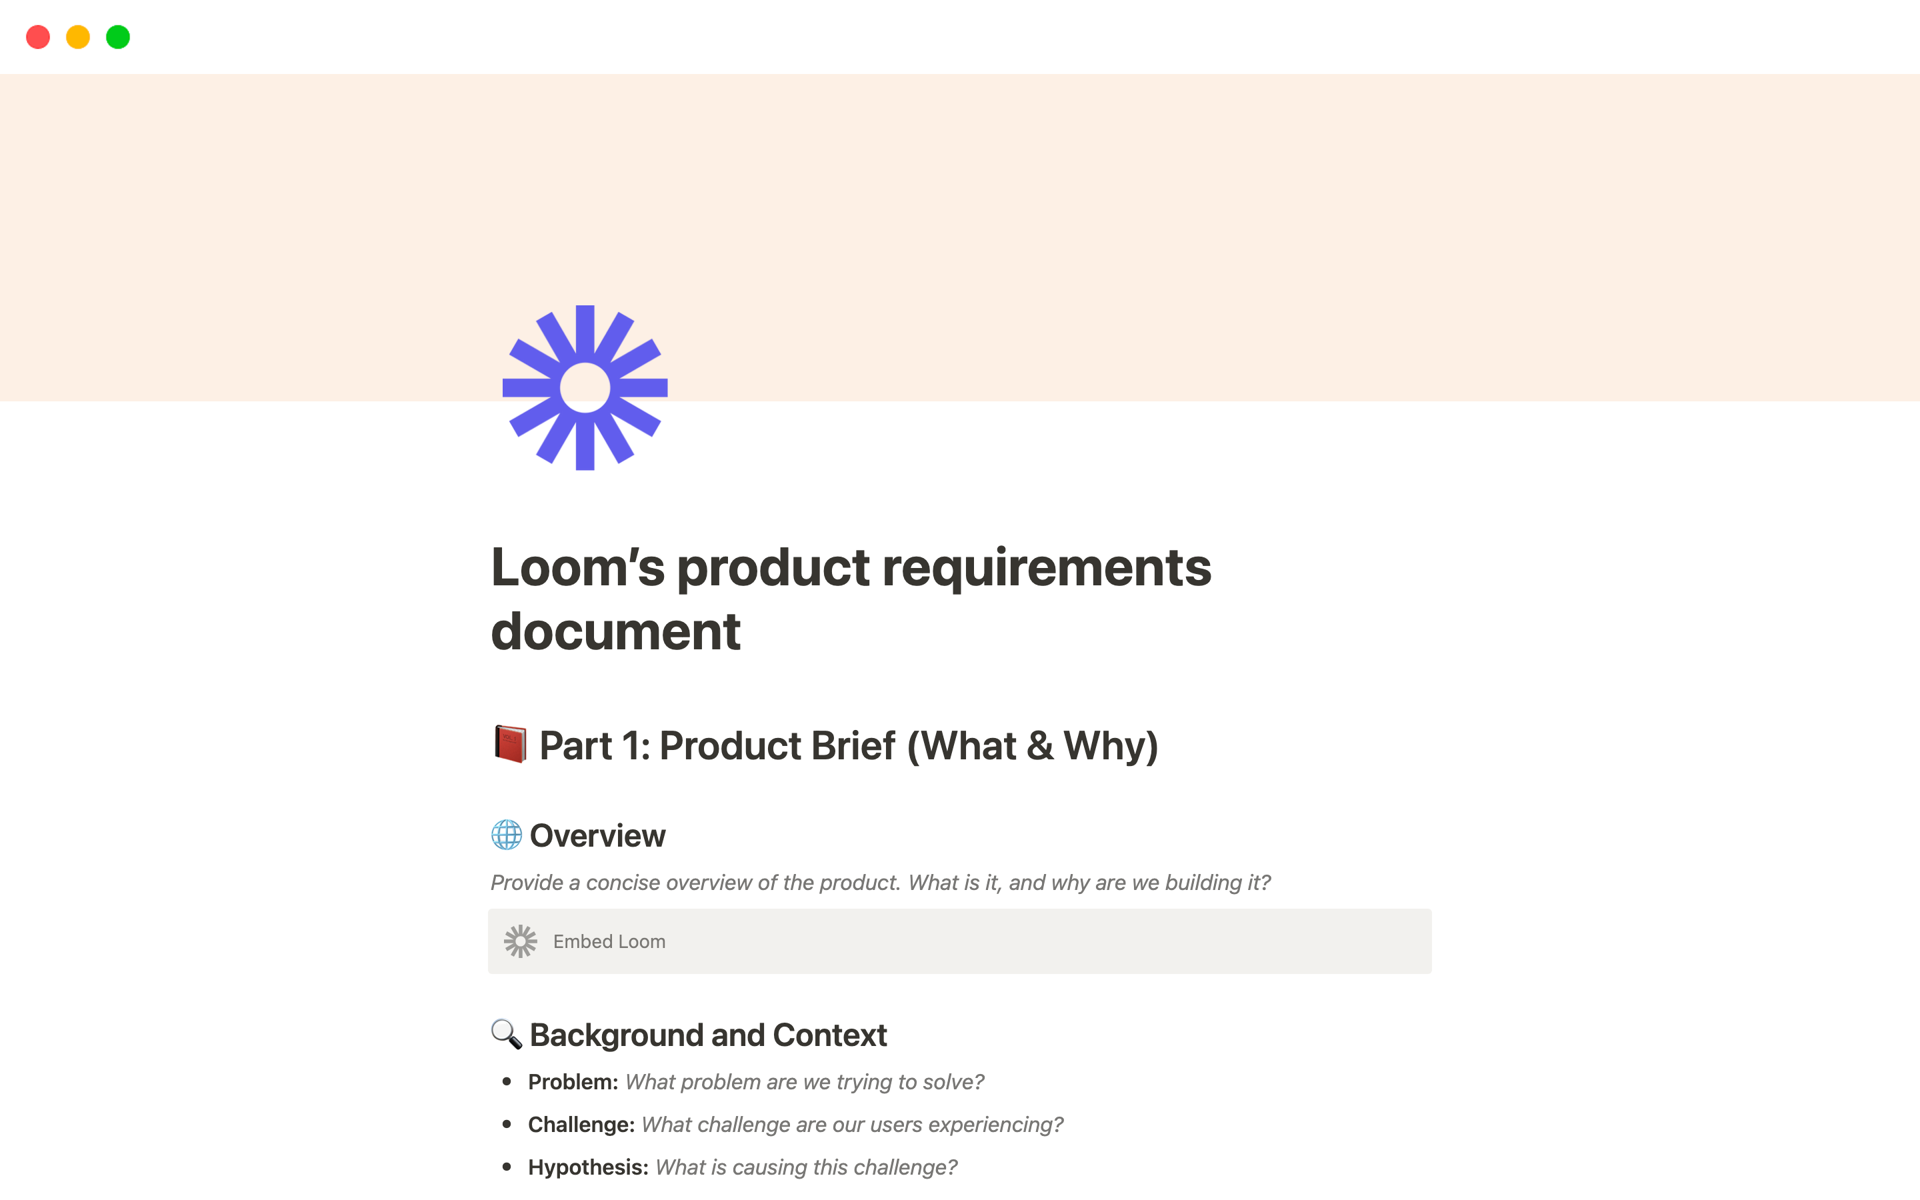 Build your product thoughtfully with Loom’s Product Requirements Document template.